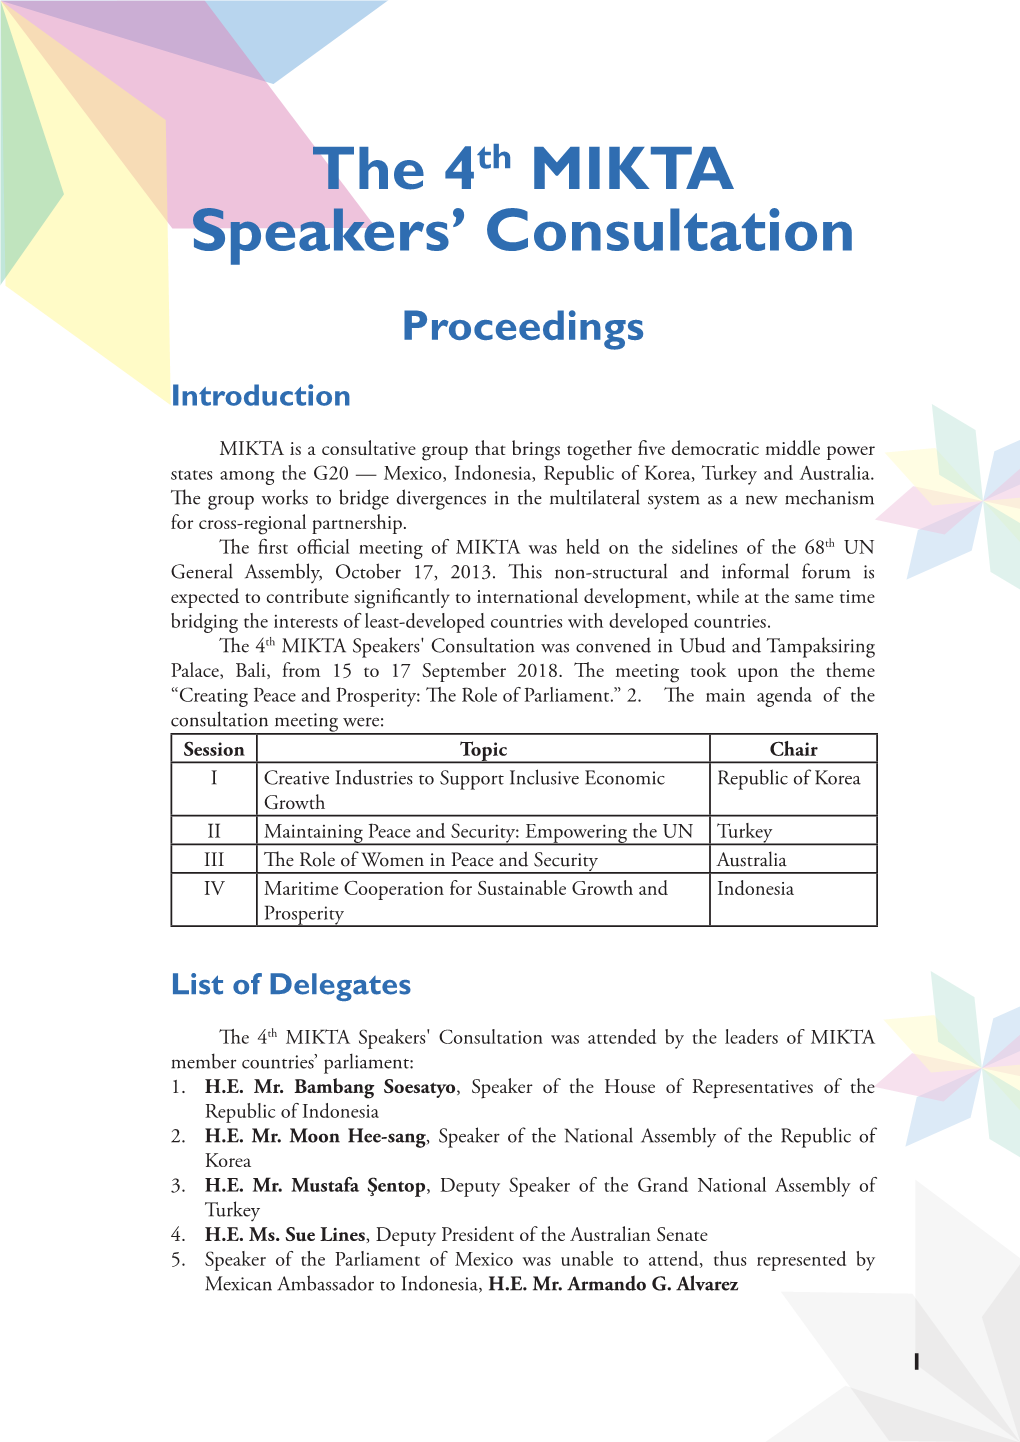 The 4Th MIKTA Speakers' Consultation Was Convened in Ubud and Tampaksiring Palace, Bali, from 15 to 17 September 2018